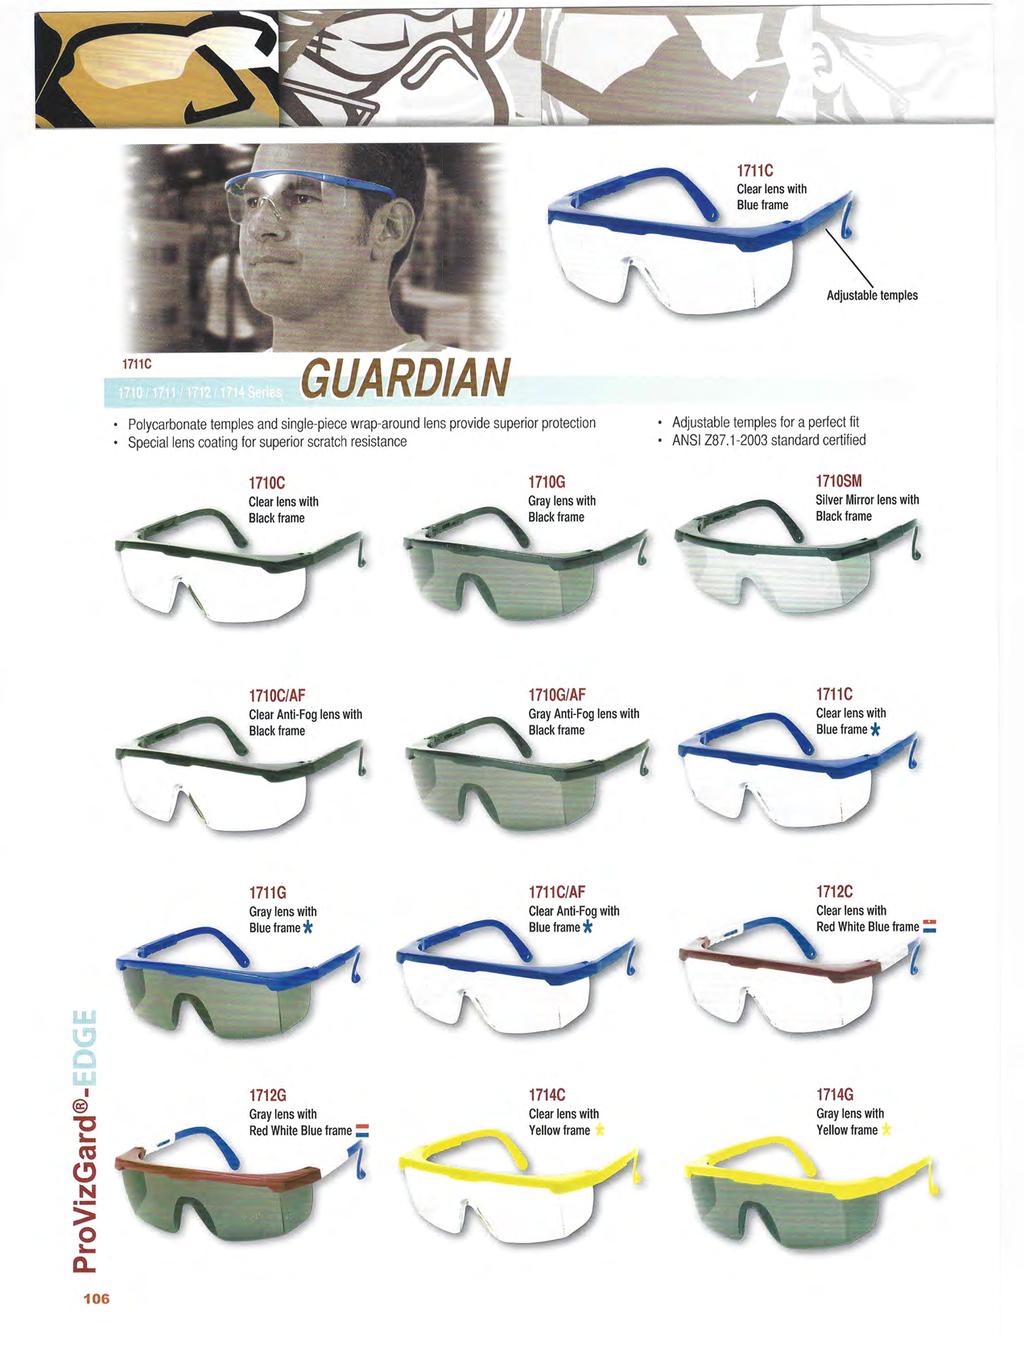 1711C GUARDIAN Polycarbonate temples and single-piece wrap-around lens provide superior protection Special lens coating for superior scratch resistance Adjustable temples for a perfect fit ANSI 287.